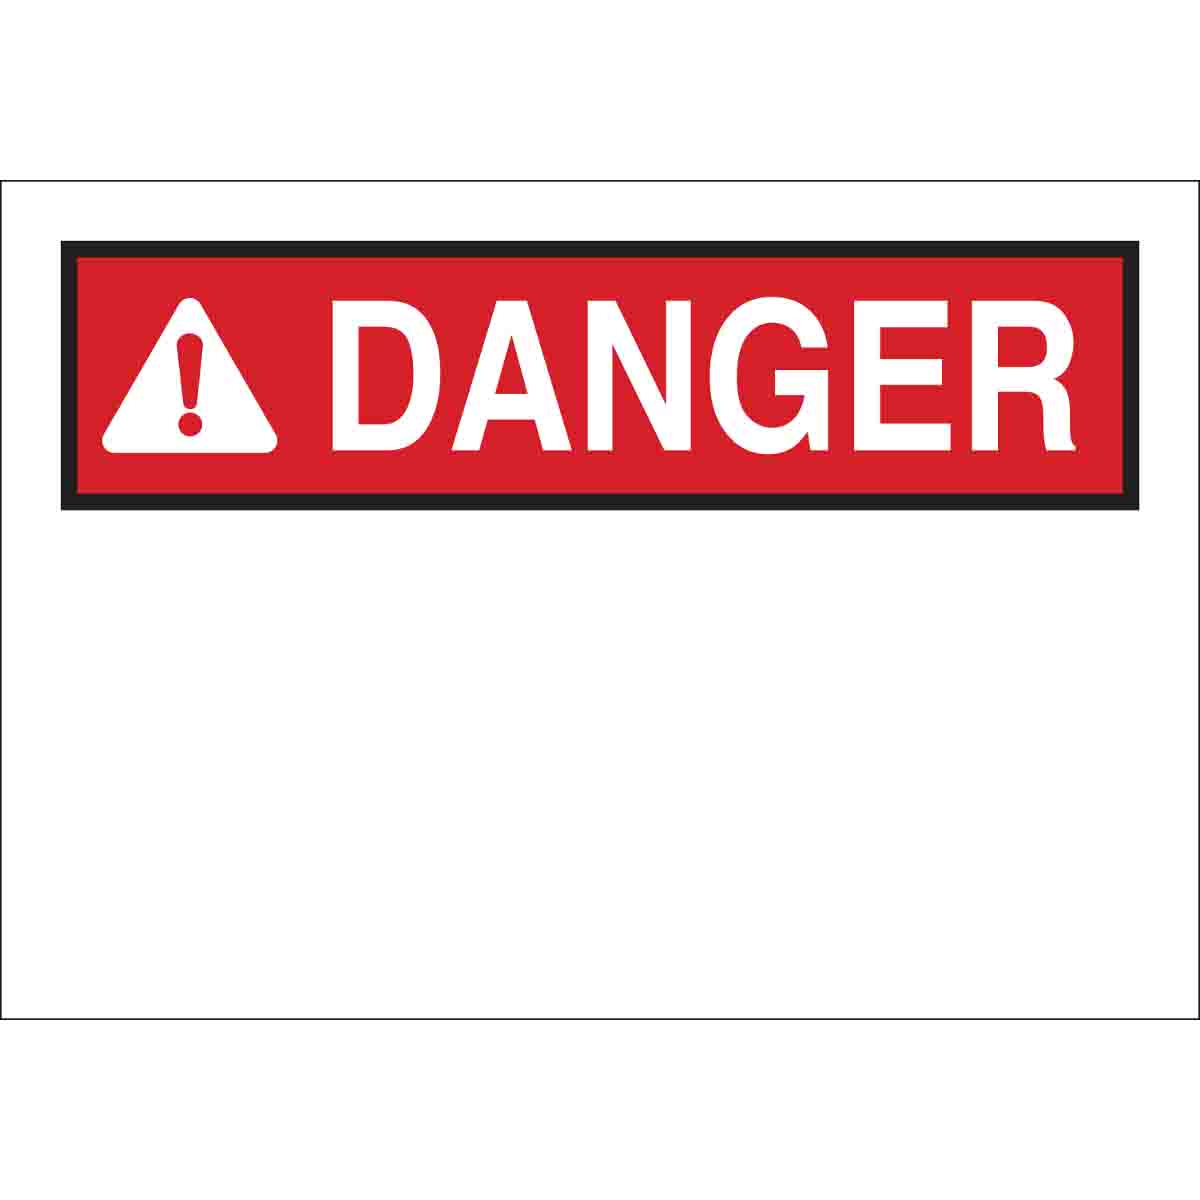 Details about  / NEW Brady 88191 Danger Warning Safety Sign 10/" x 7/"  *FREE SHIPPING*